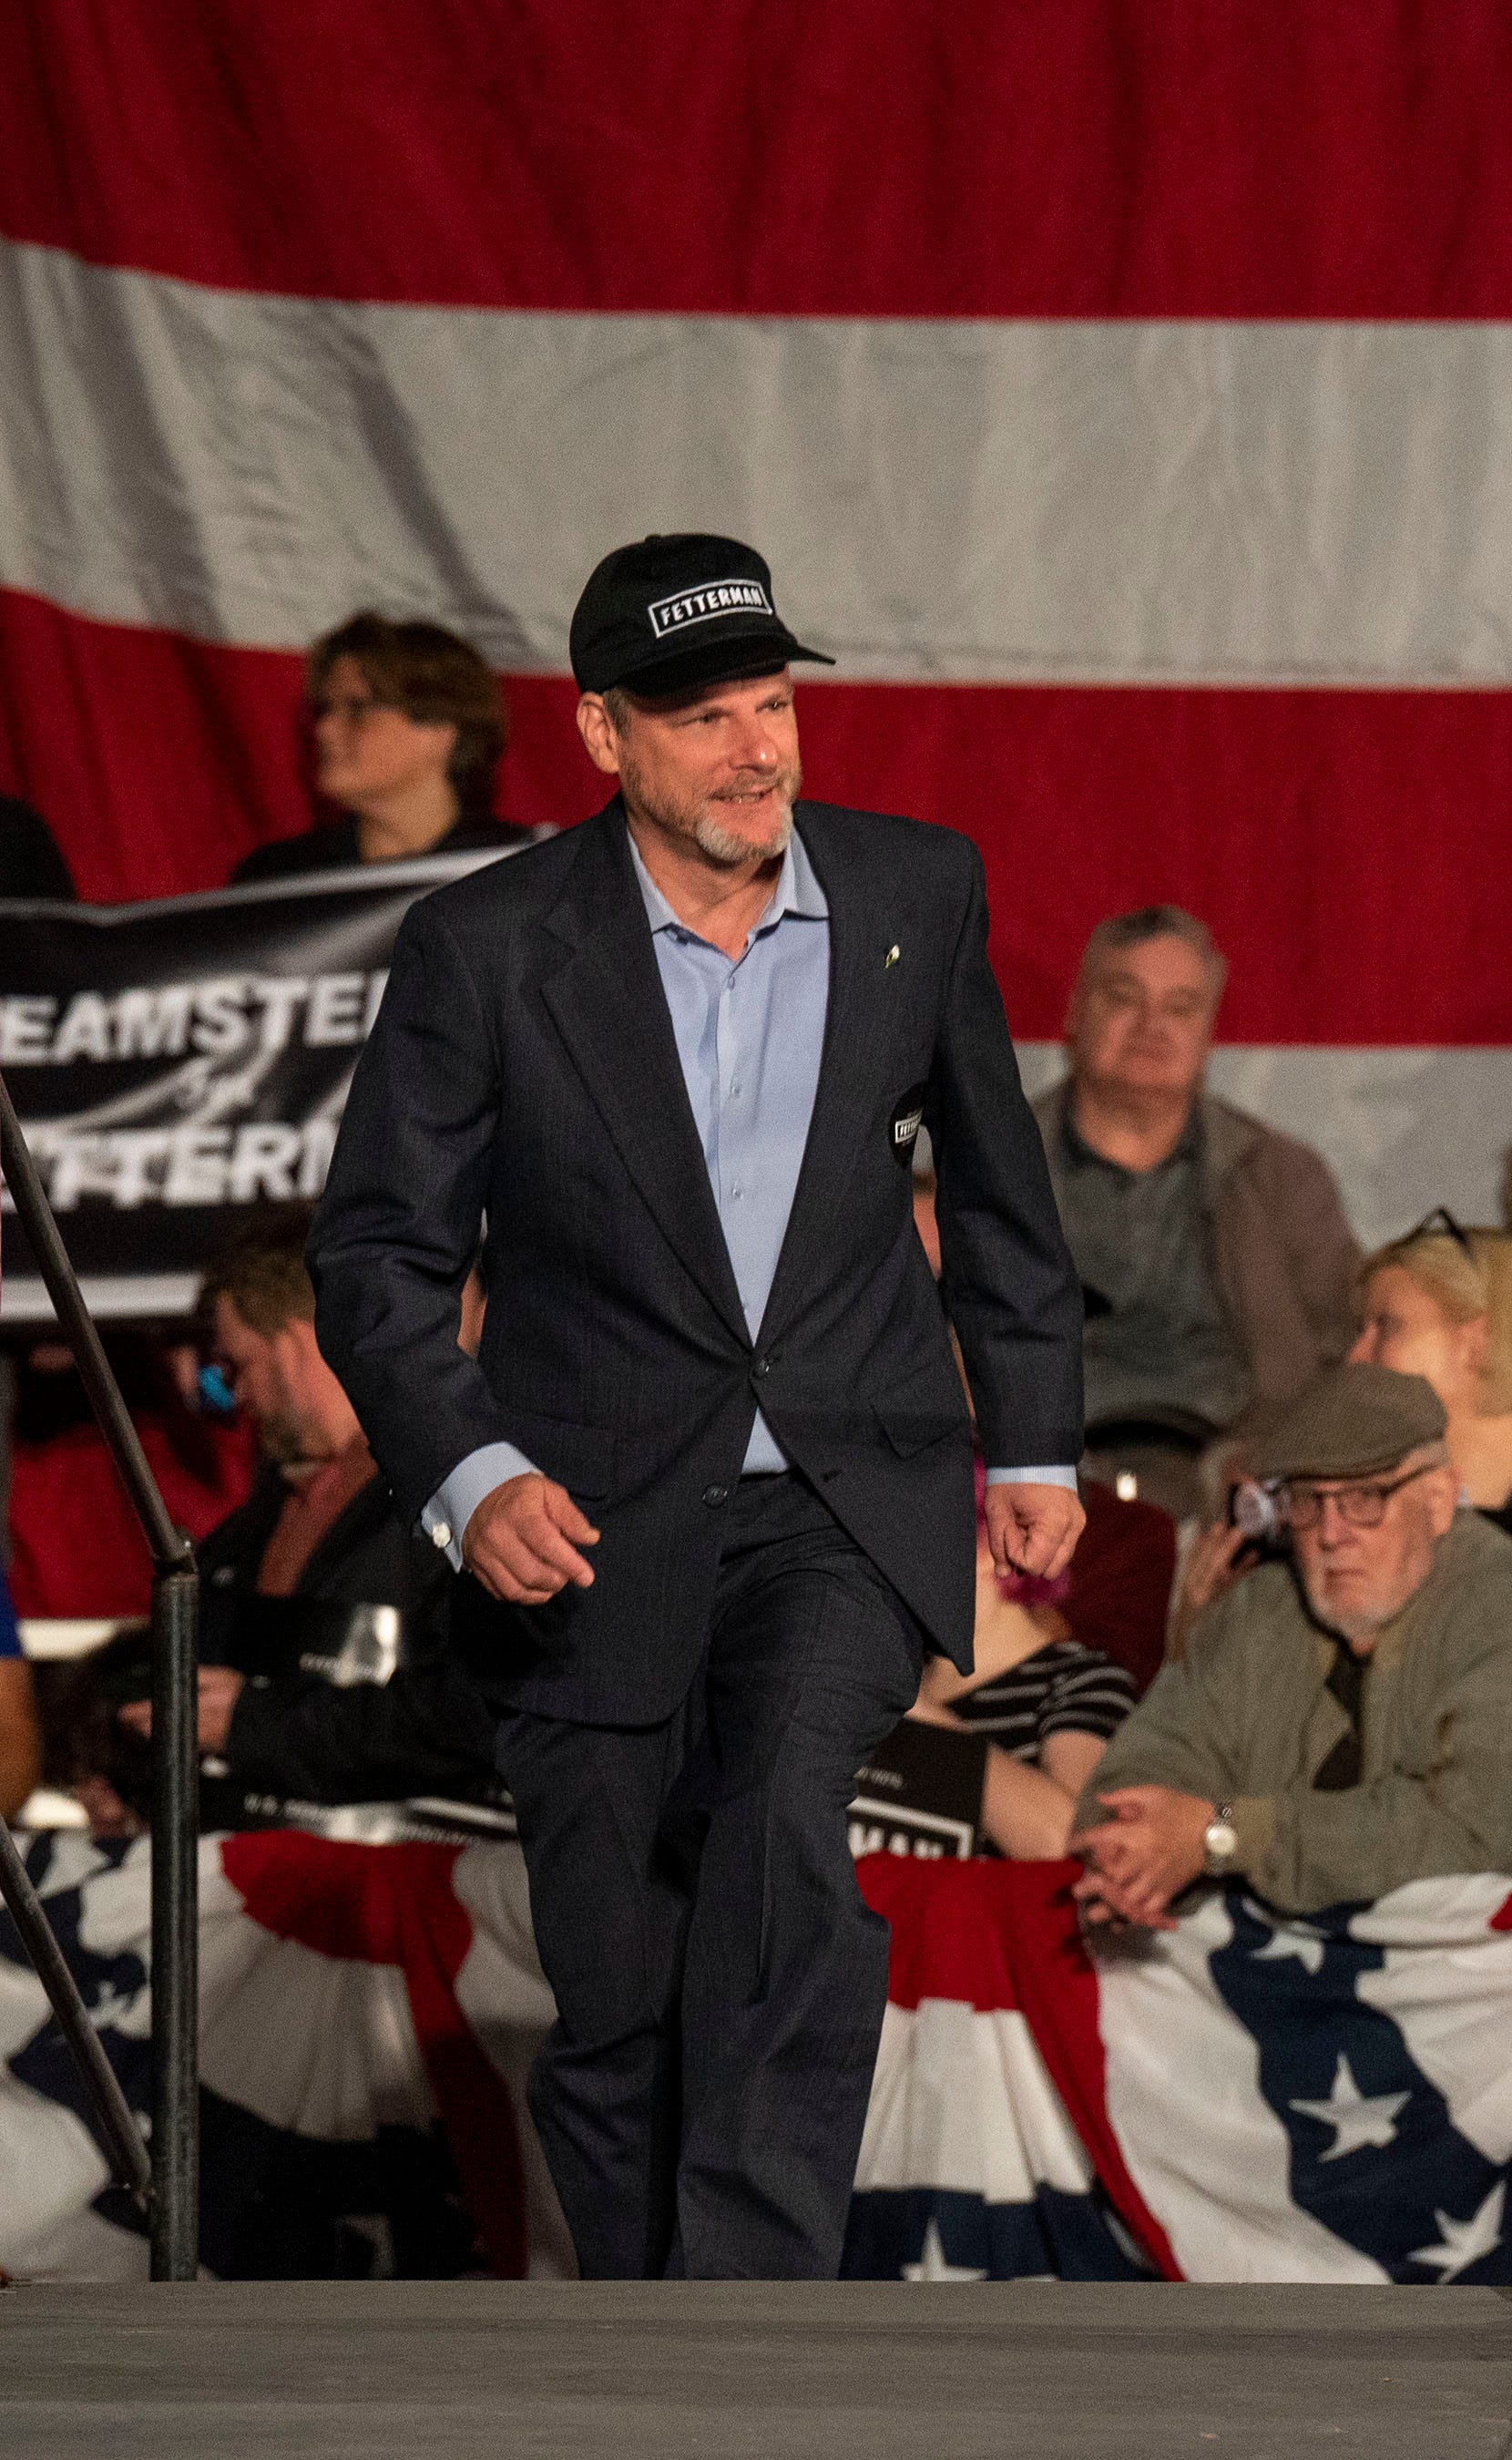 Mayor Michael Helfrich speaking at the rally for John Fetterman in York on Saturday, Oct. 8, 2022.